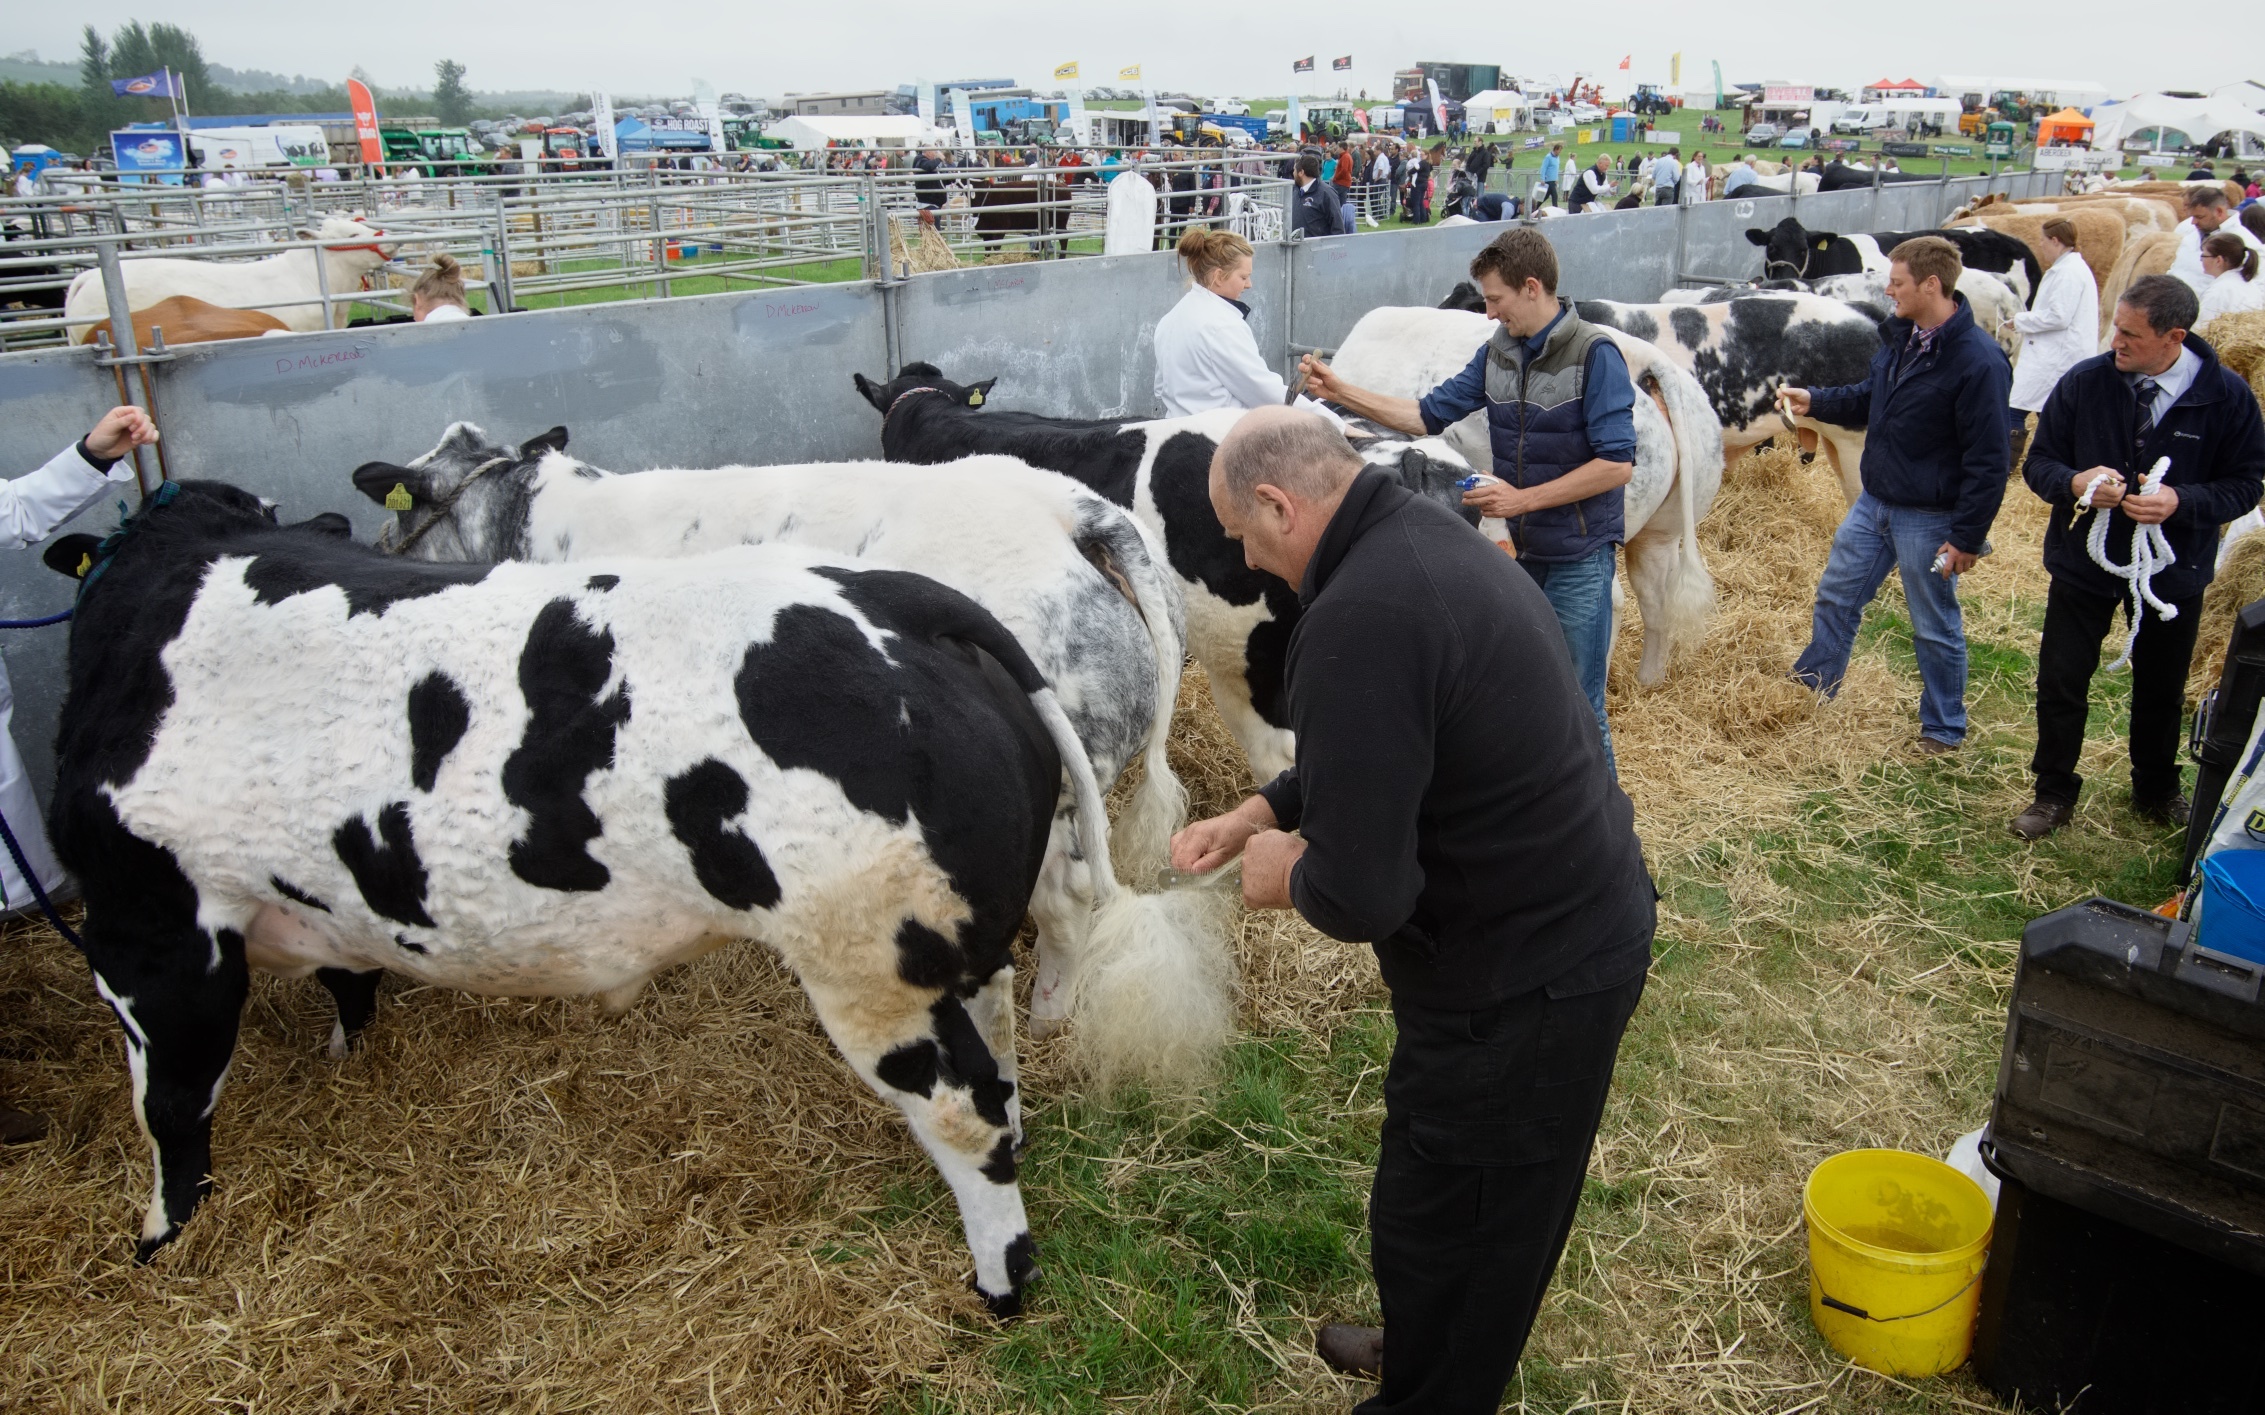 Breeders went to great lengths to impress the judges